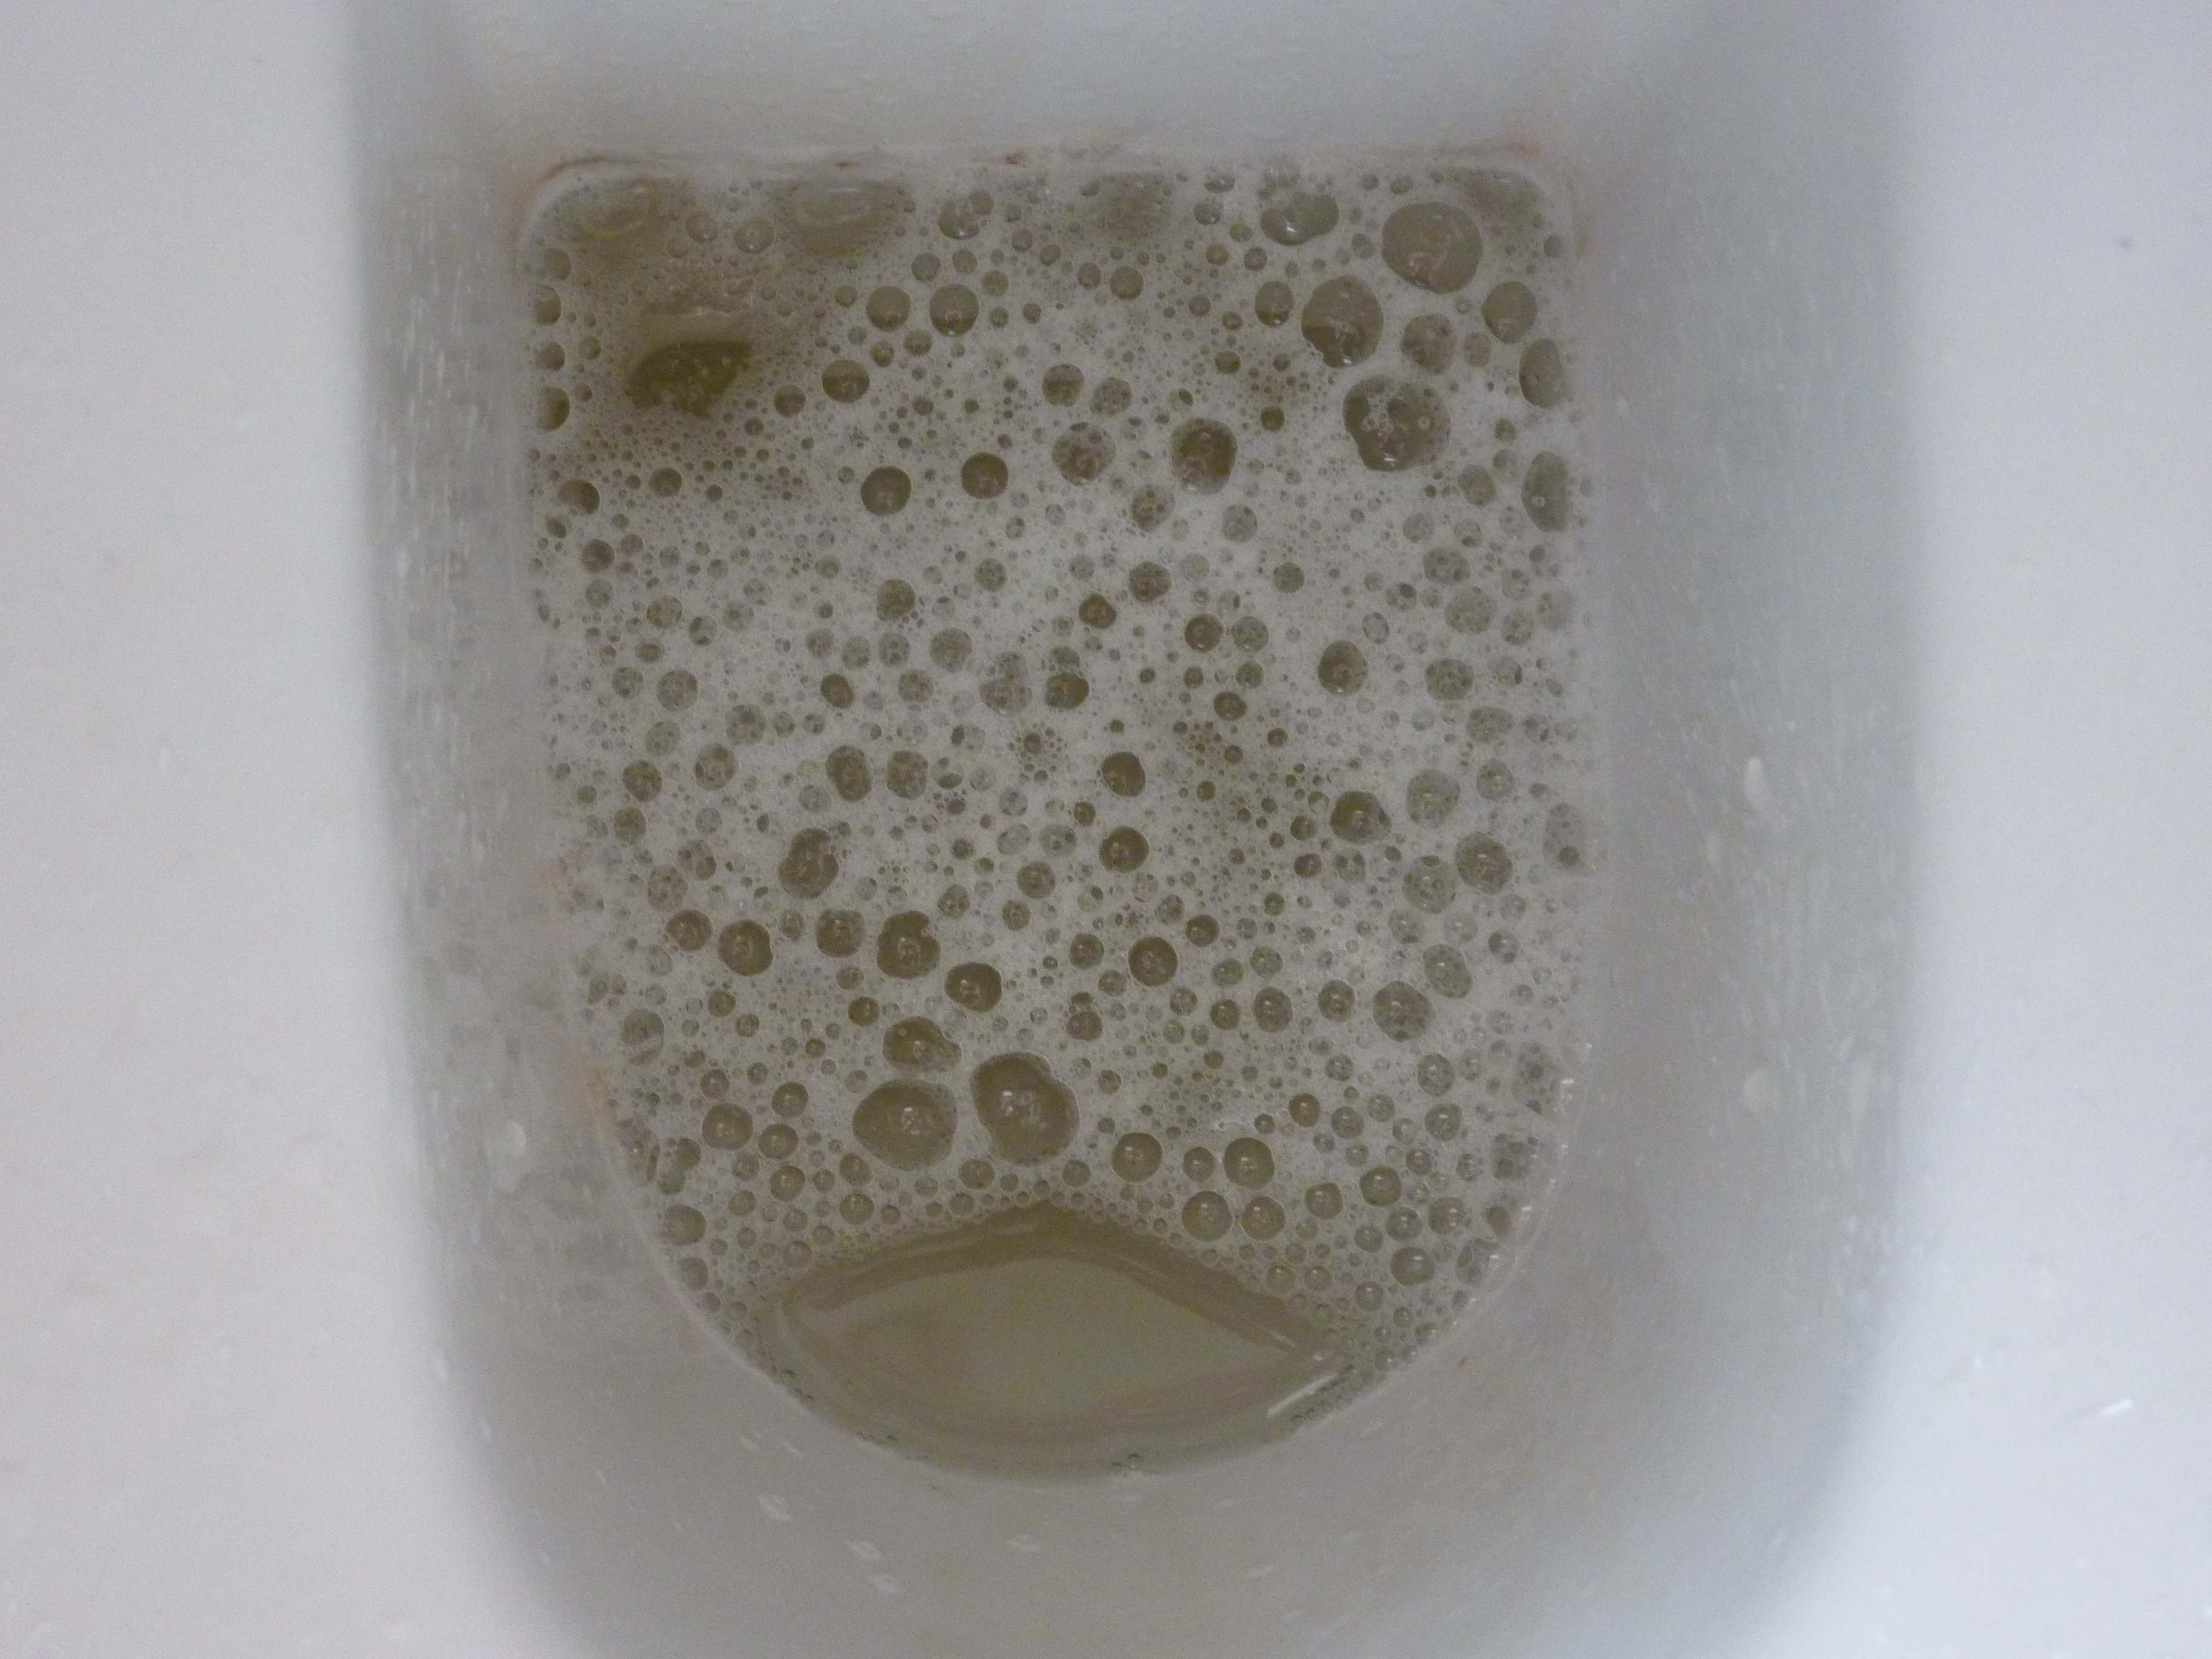 Frothy urine might be one of the first signs a patient notices (source)